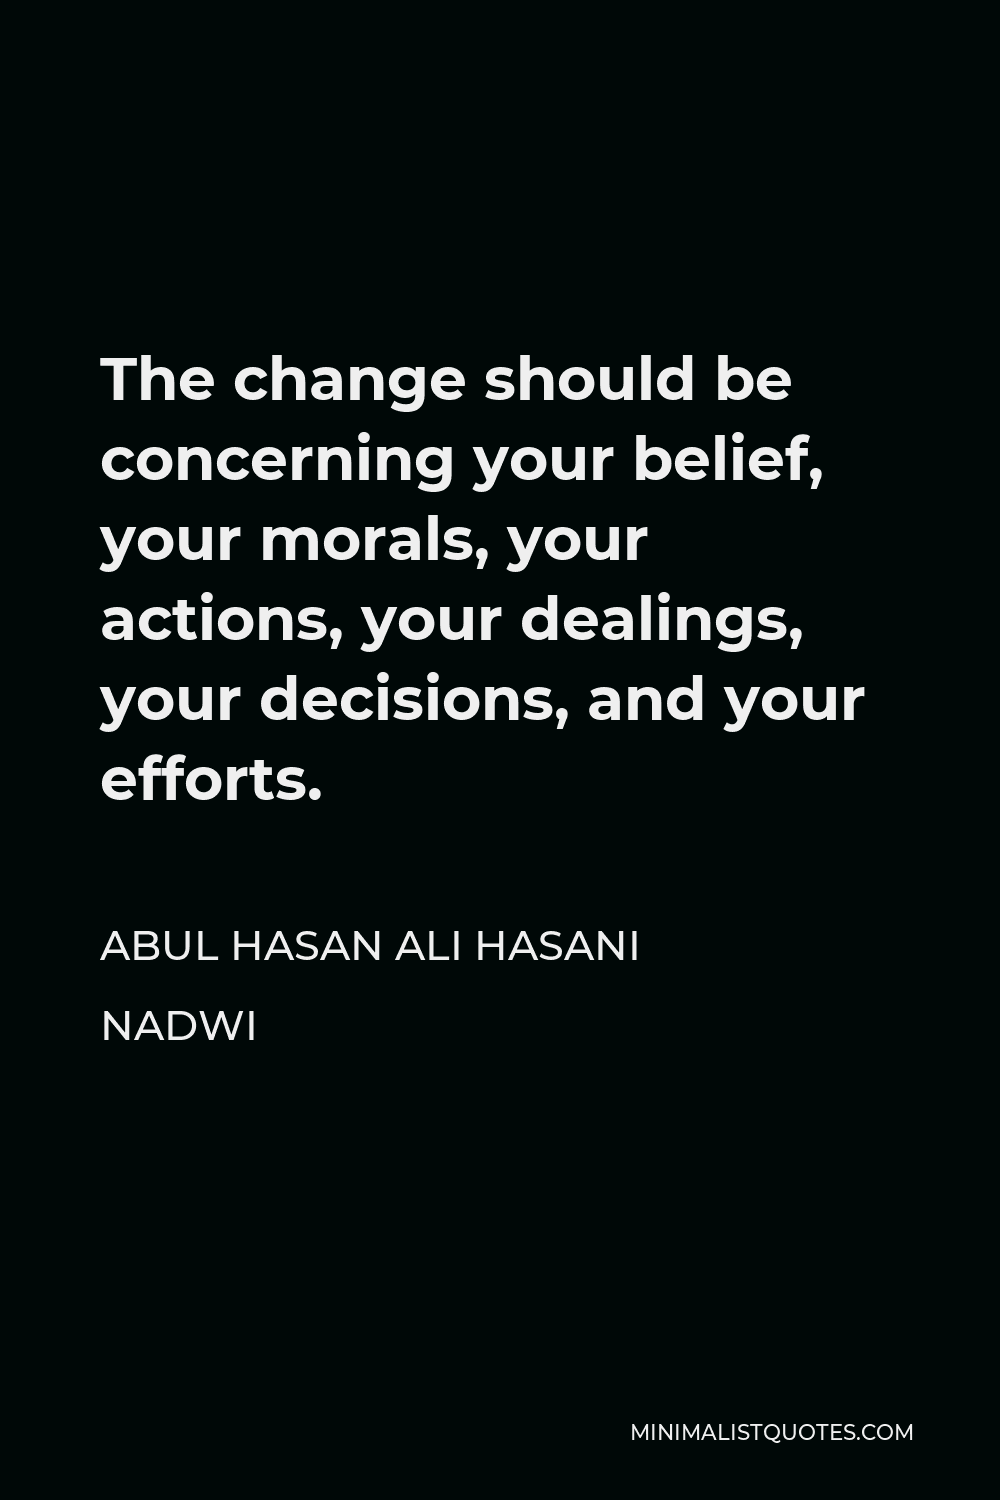 Abul Hasan Ali Hasani Nadwi Quote - The change should be concerning your belief, your morals, your actions, your dealings, your decisions, and your efforts.